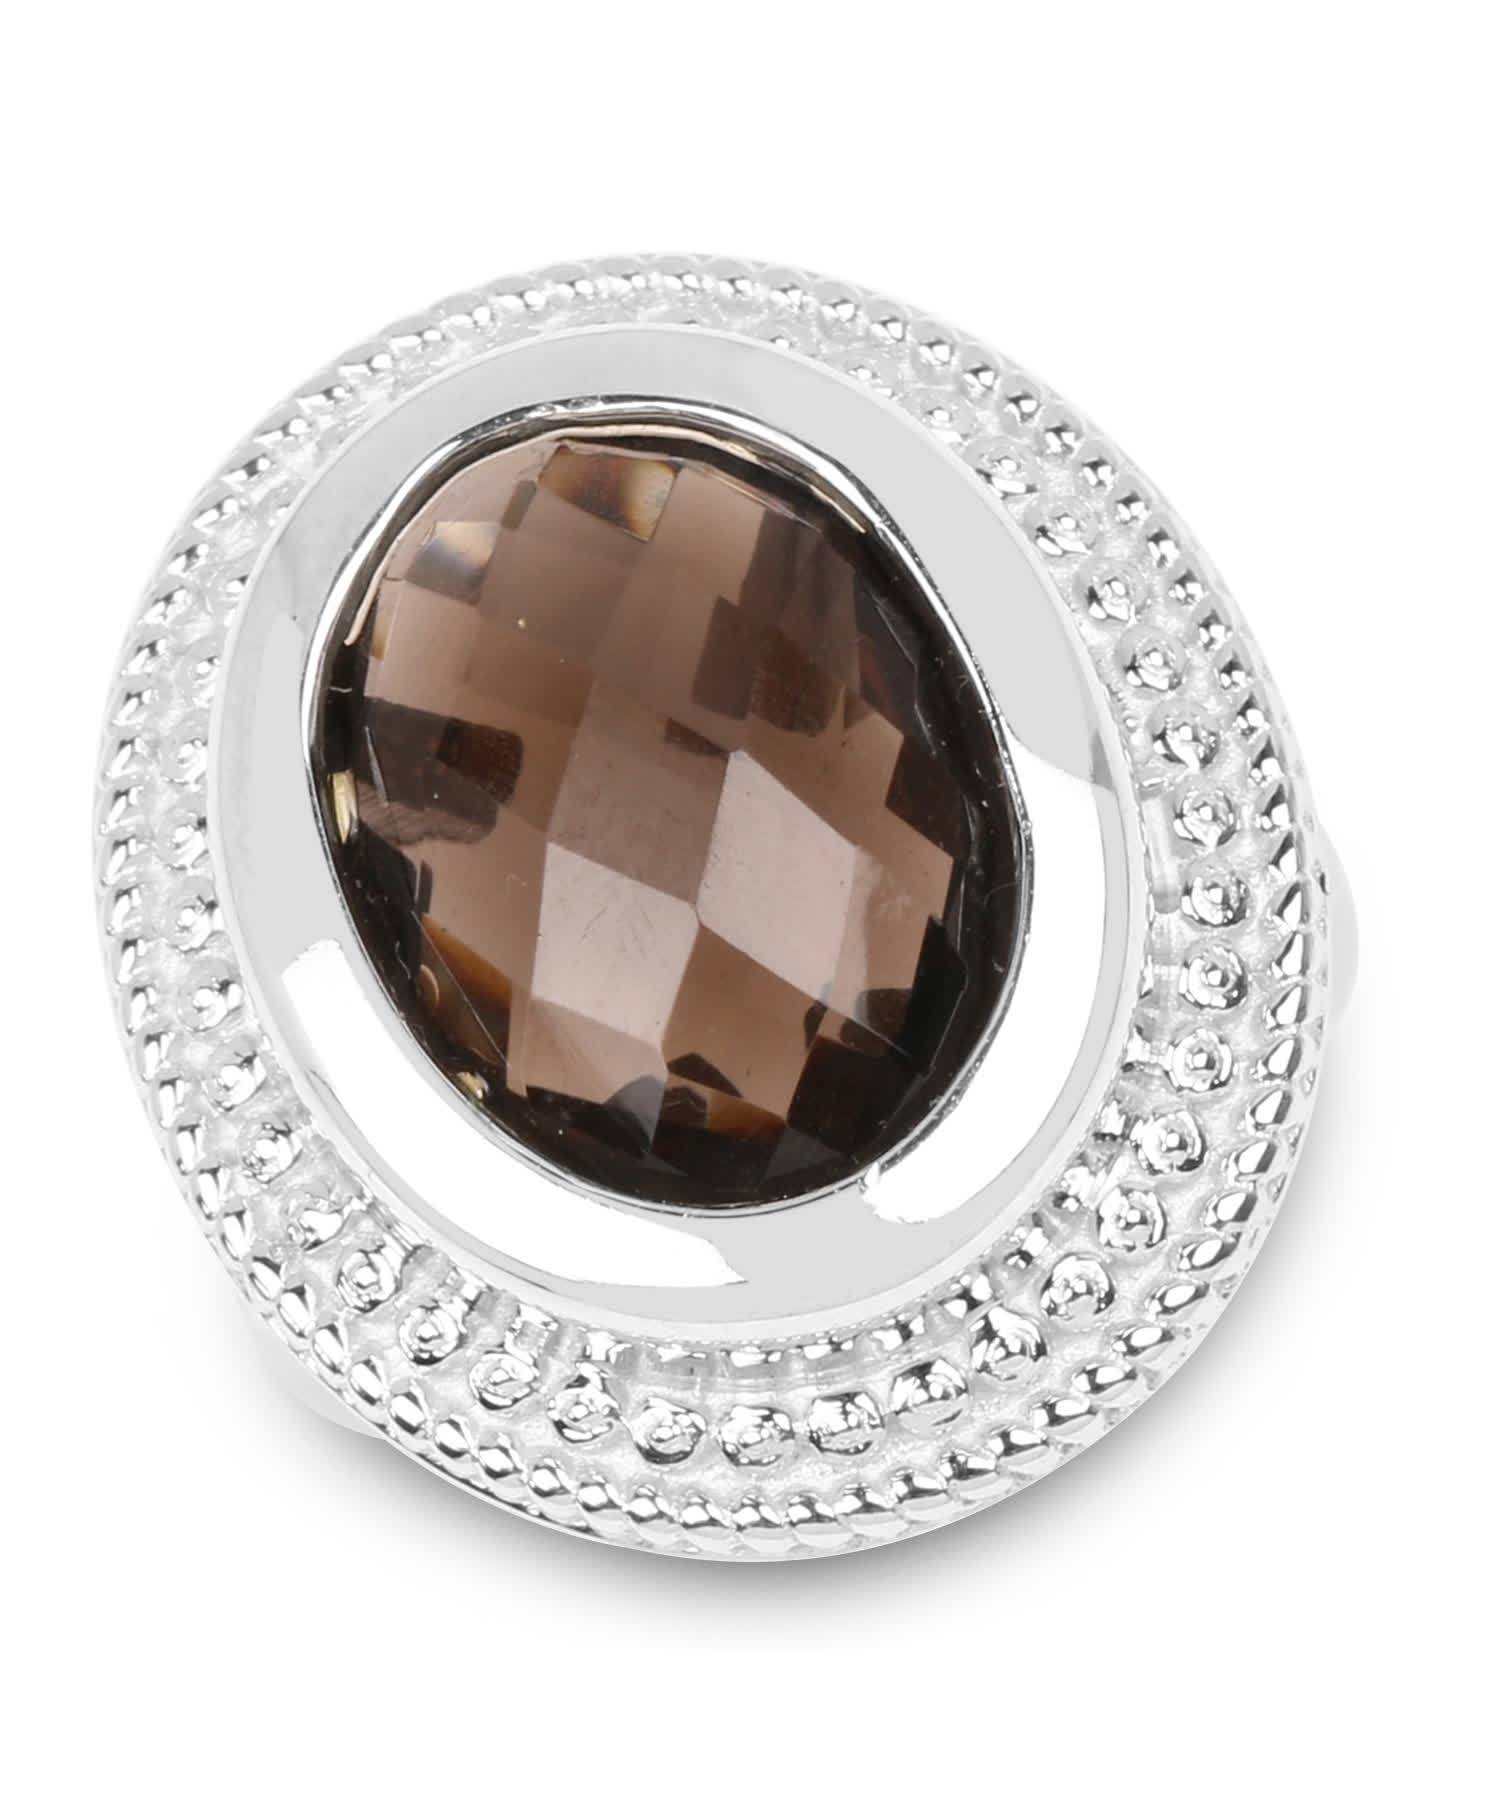 7.90ctw Natural Smoky Quartz Rhodium Plated 925 Sterling Silver Oval Cocktail Ring View 1